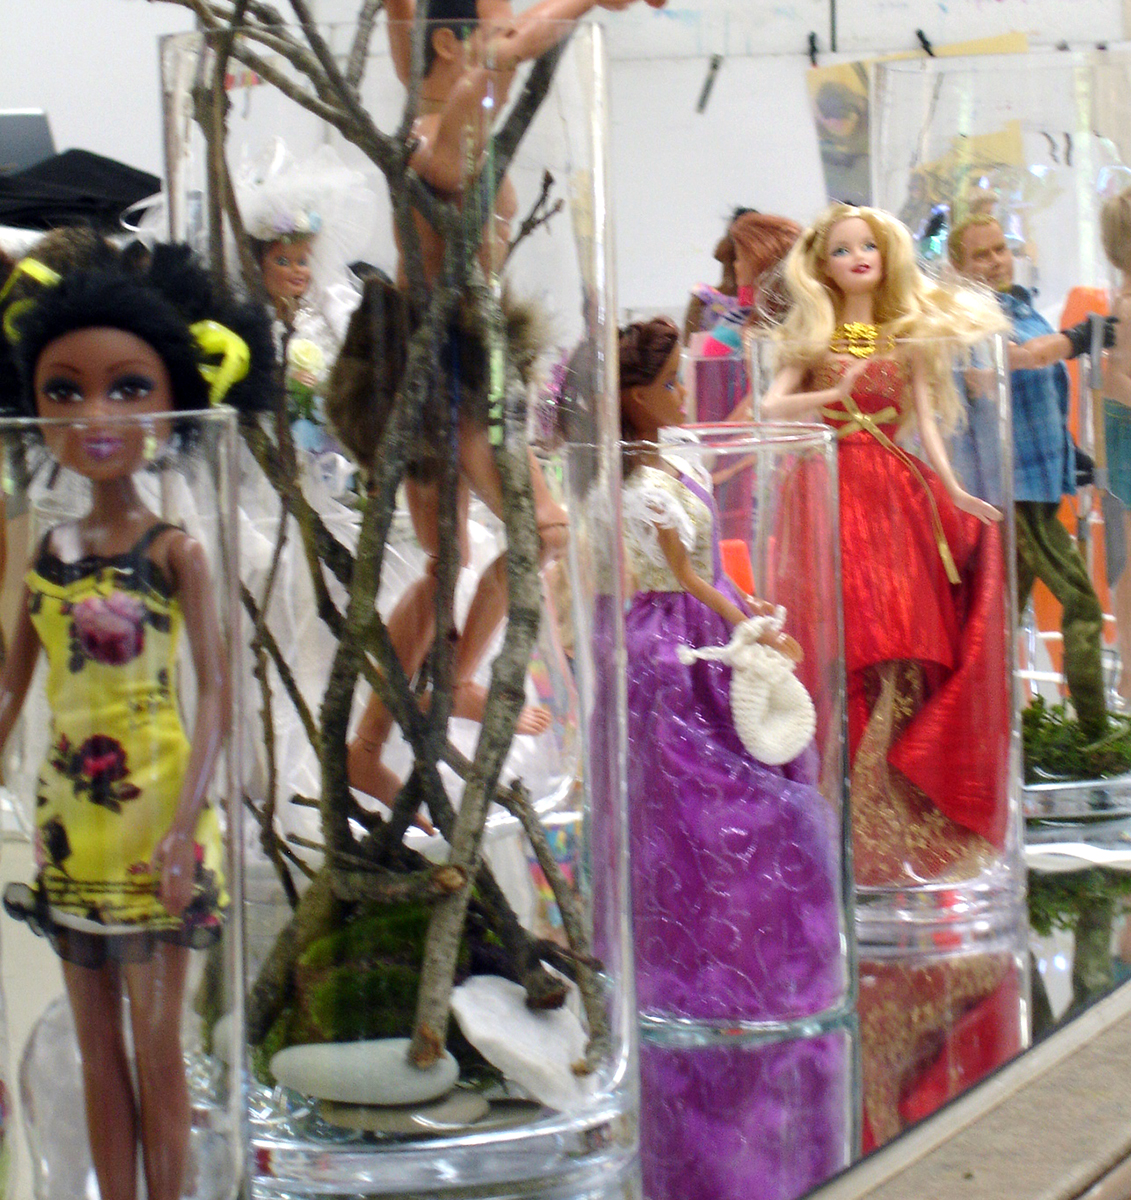 After canvasing second hand stores for glass cylinders and 12" dolls, I began to arrange them.